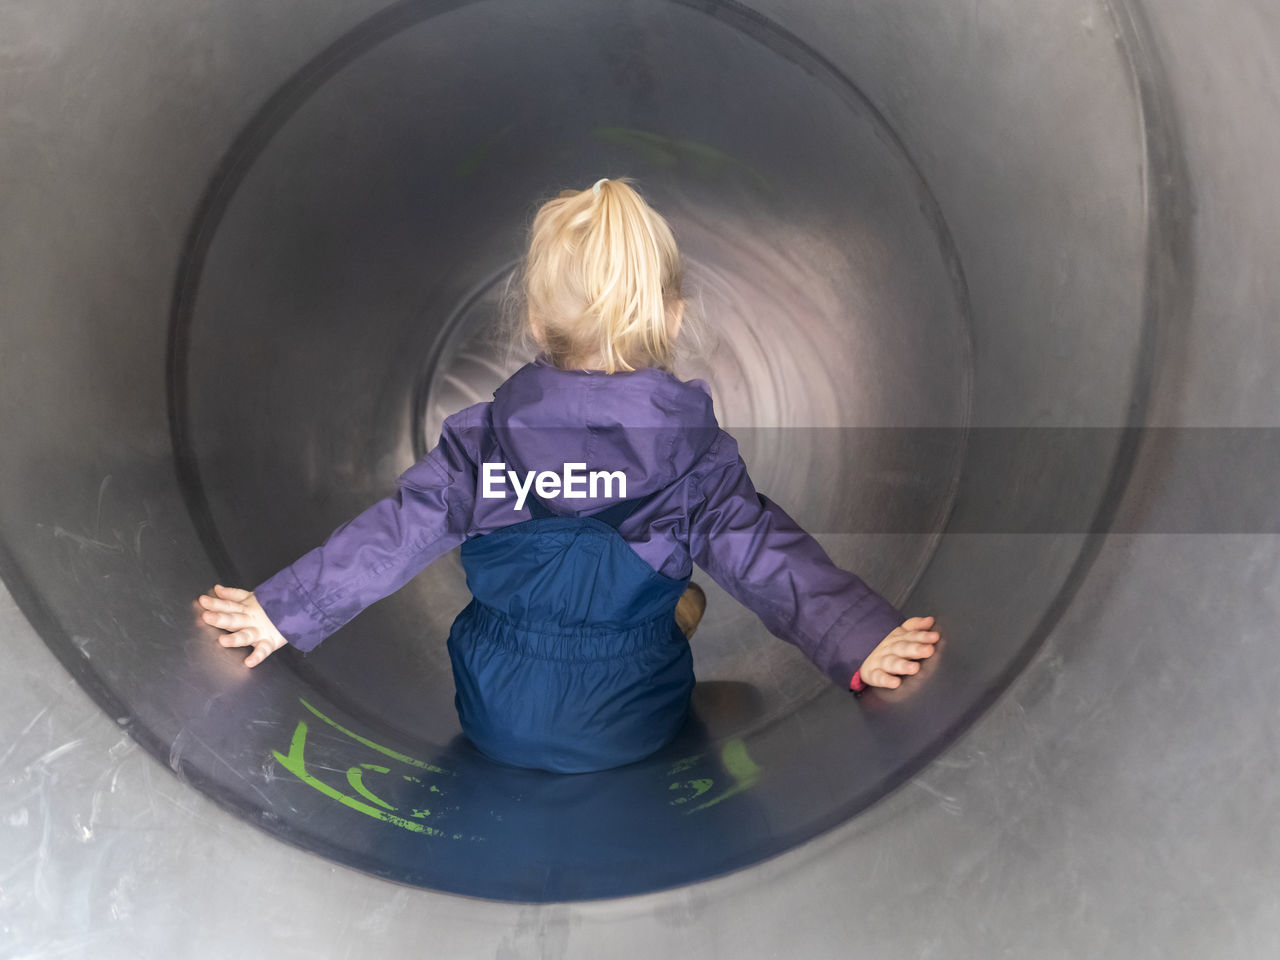 Blond girl with arms outstretched playing in tube slide at playground